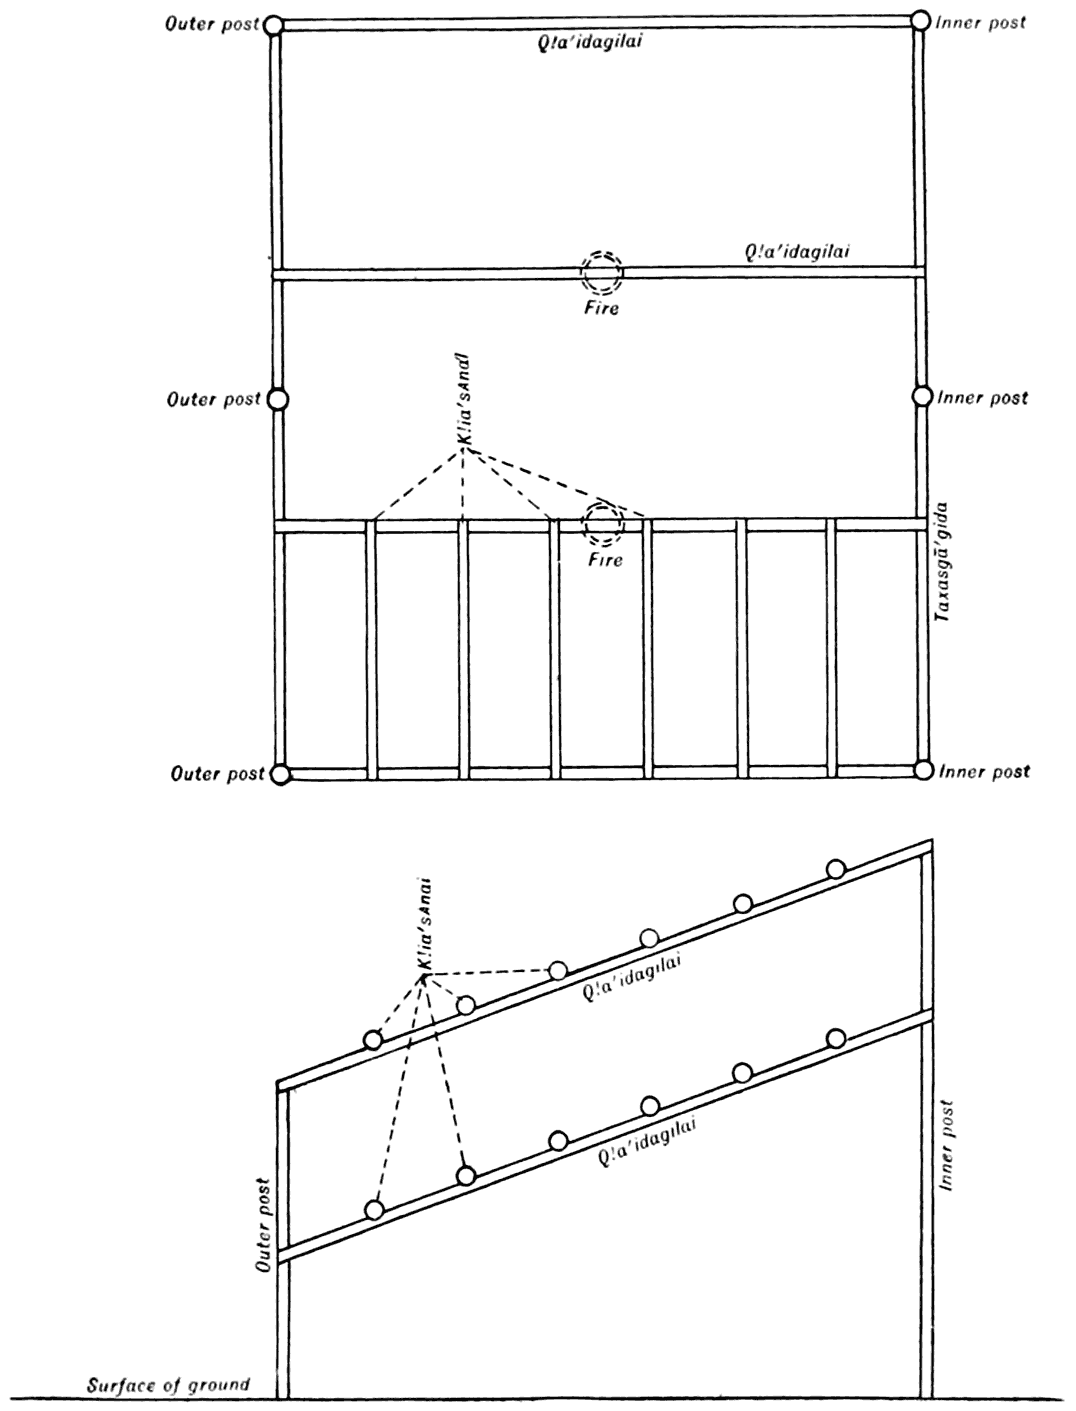 Fig. 3.—Drying frame for fish, horizontal and vertical plans.